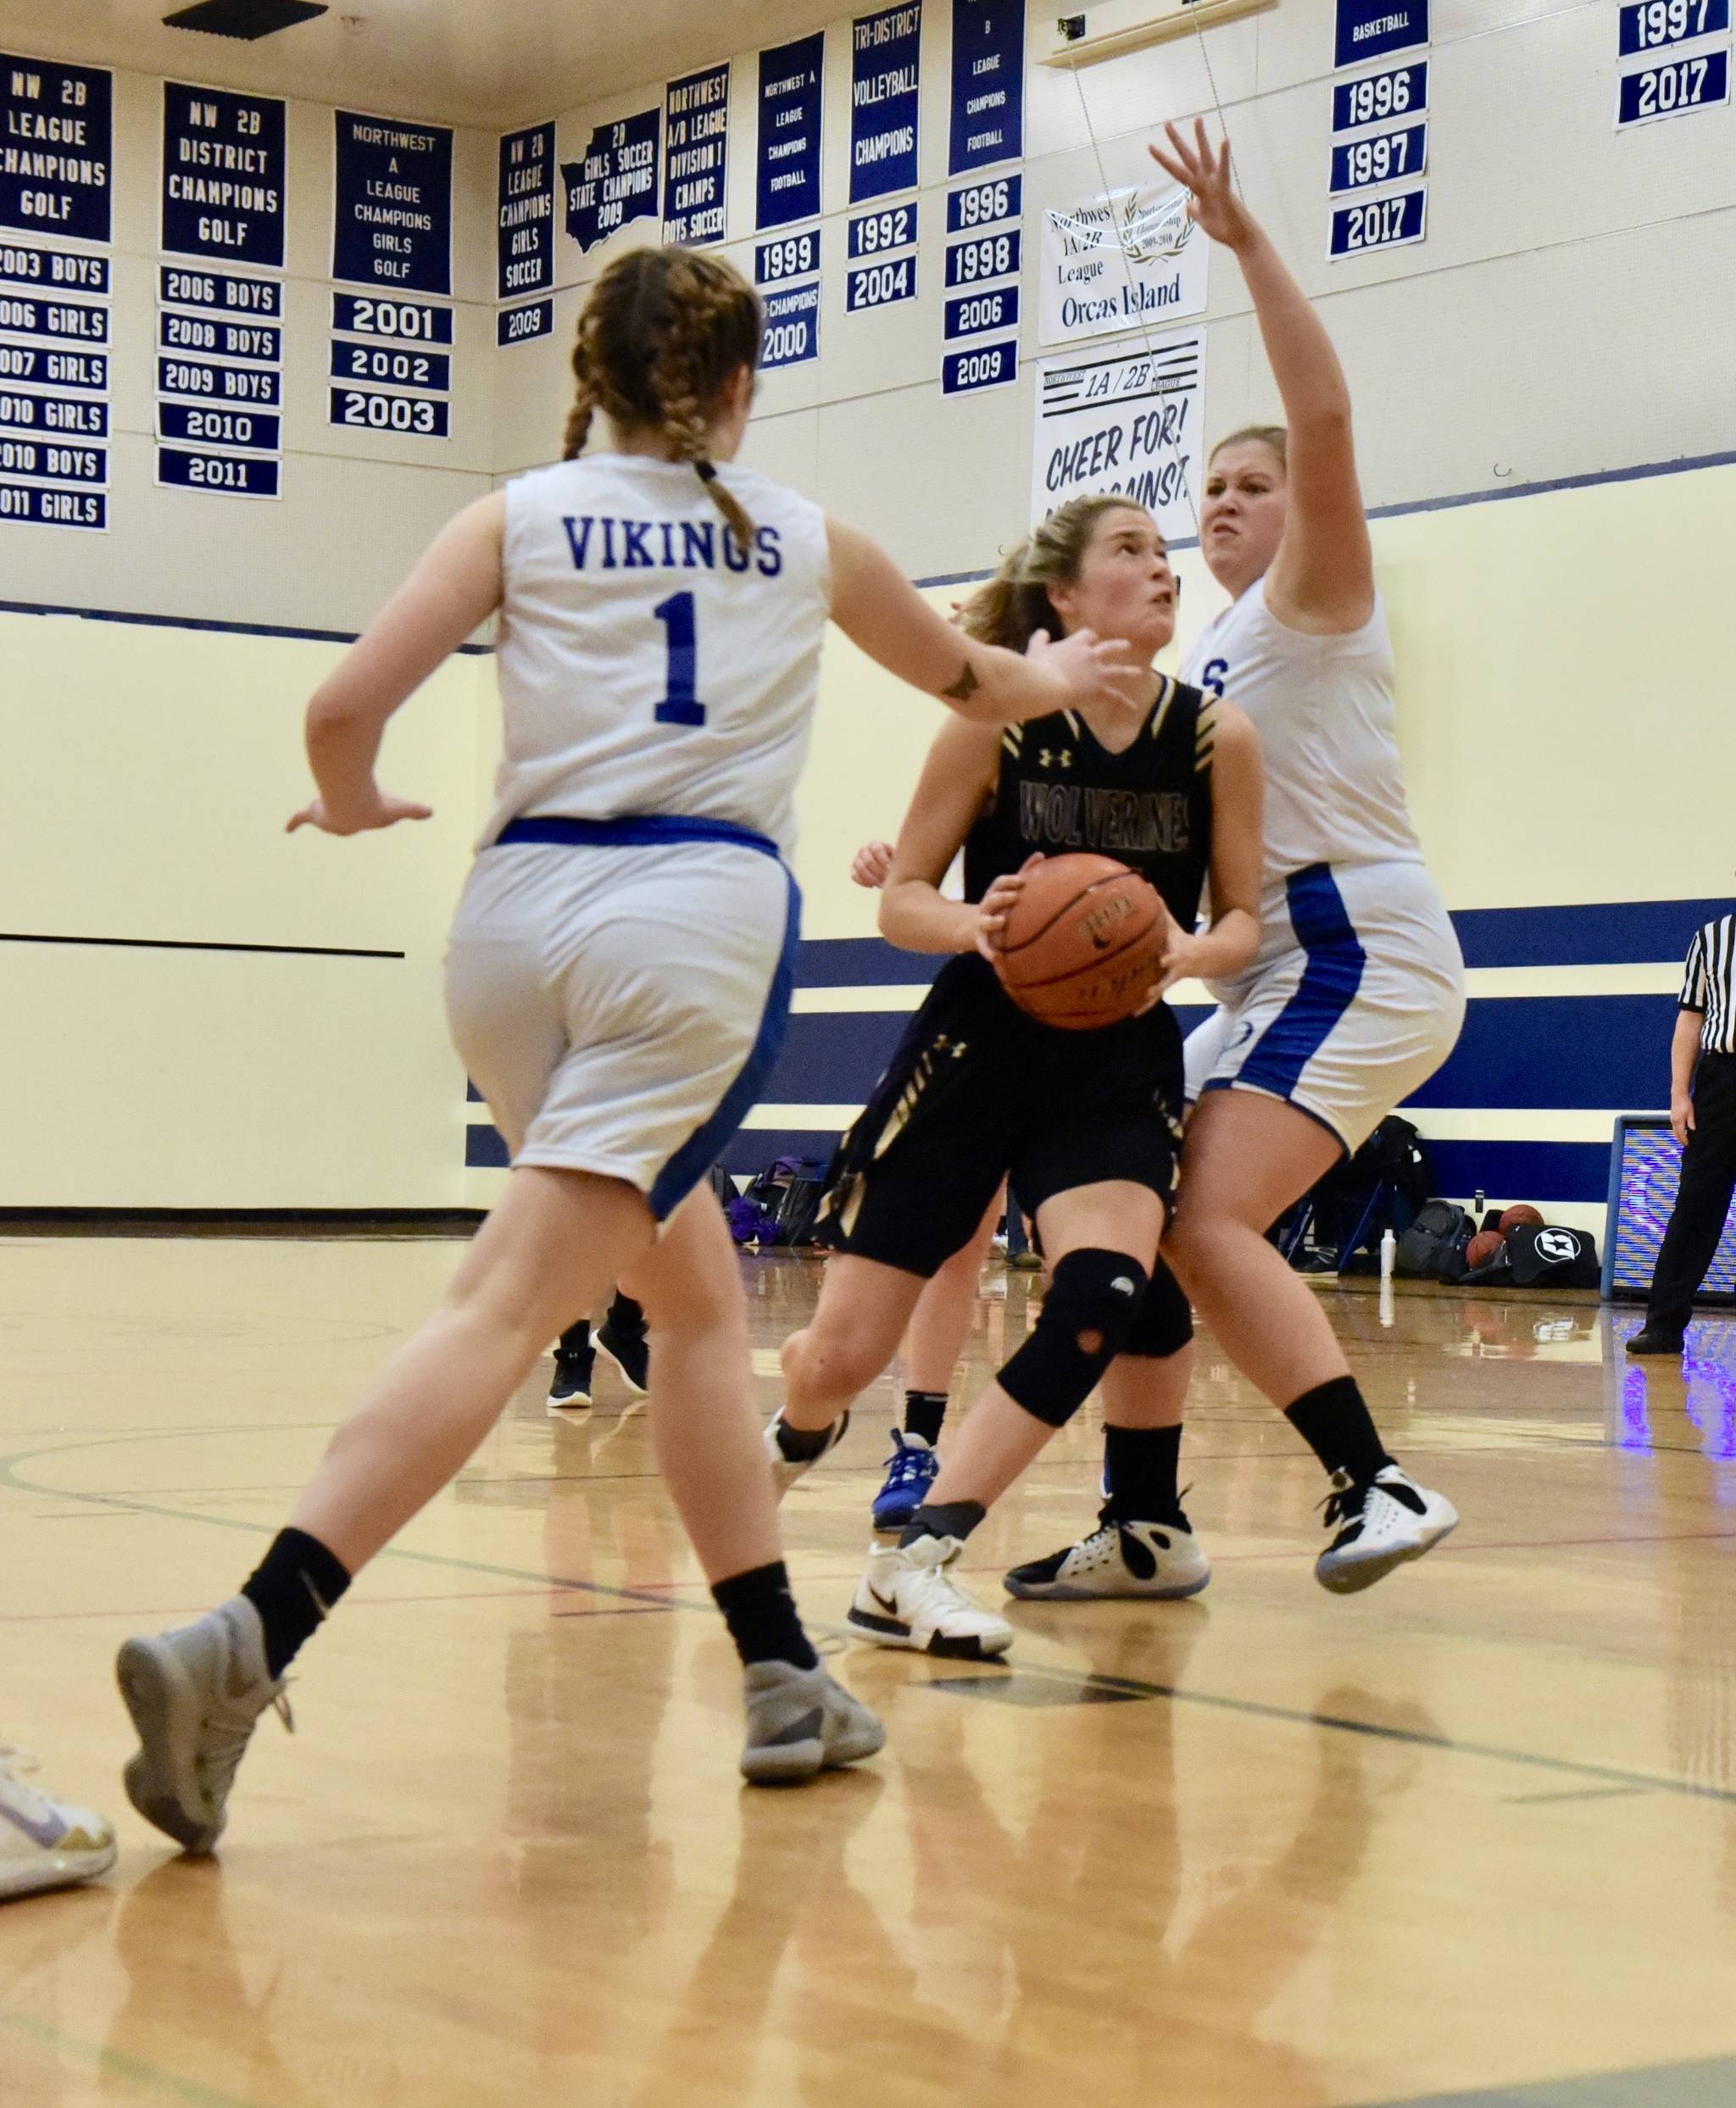 Bailee Lambright drives from in close to the basket. (Contributed photo. John Stimpson.)